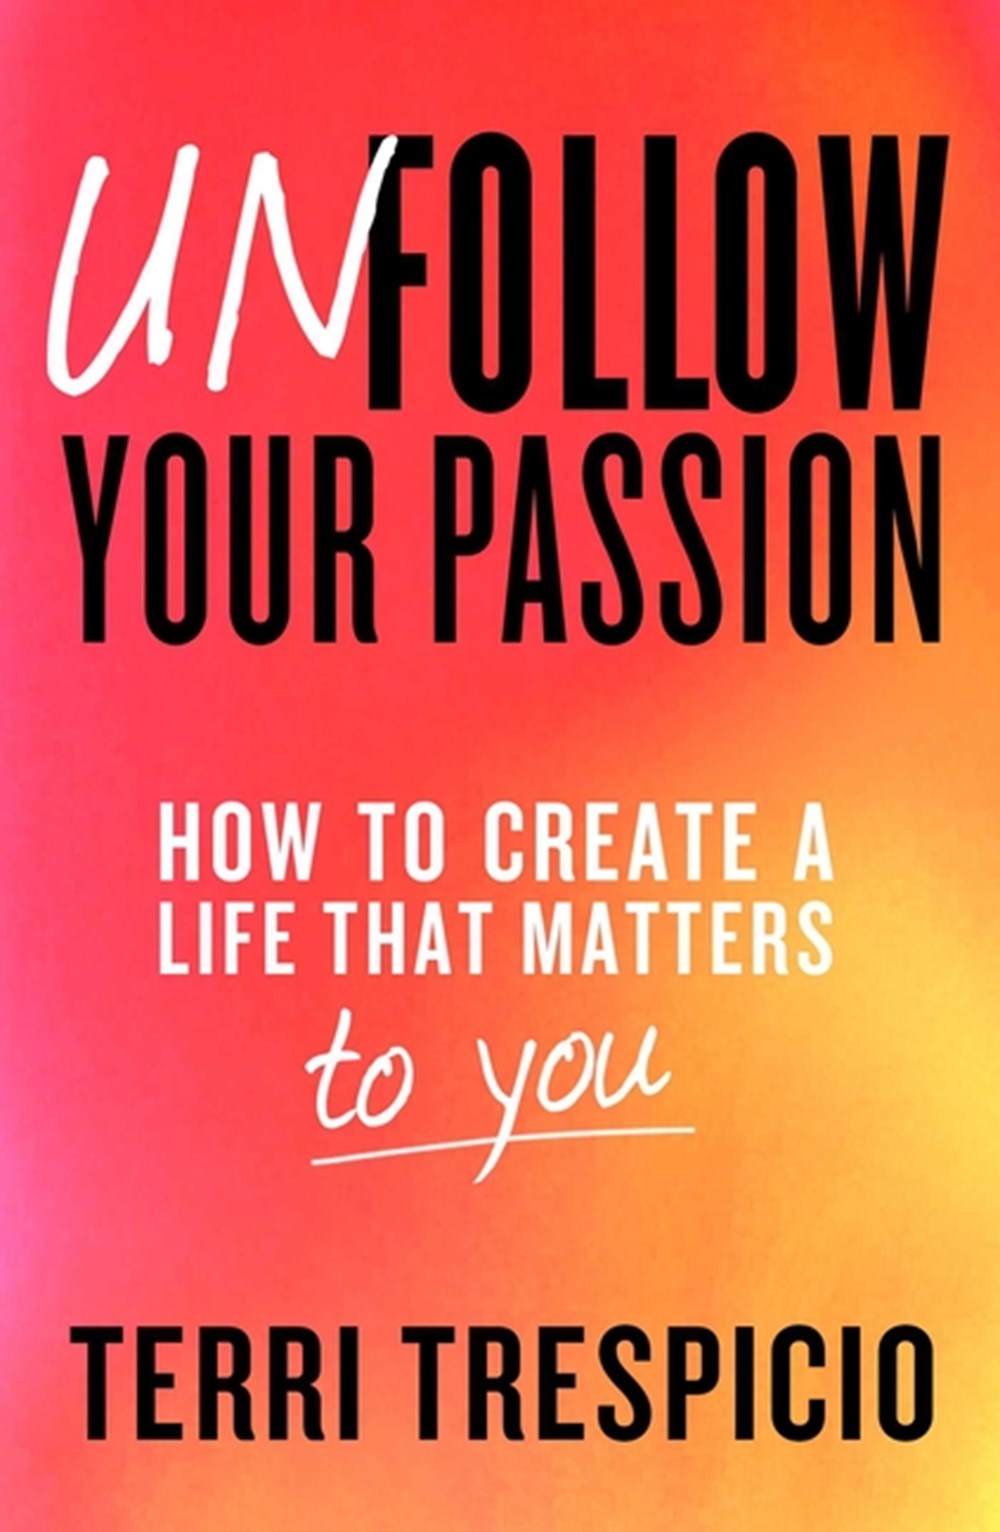 Unfollow Your Passion How to Create a Life That Matters to You